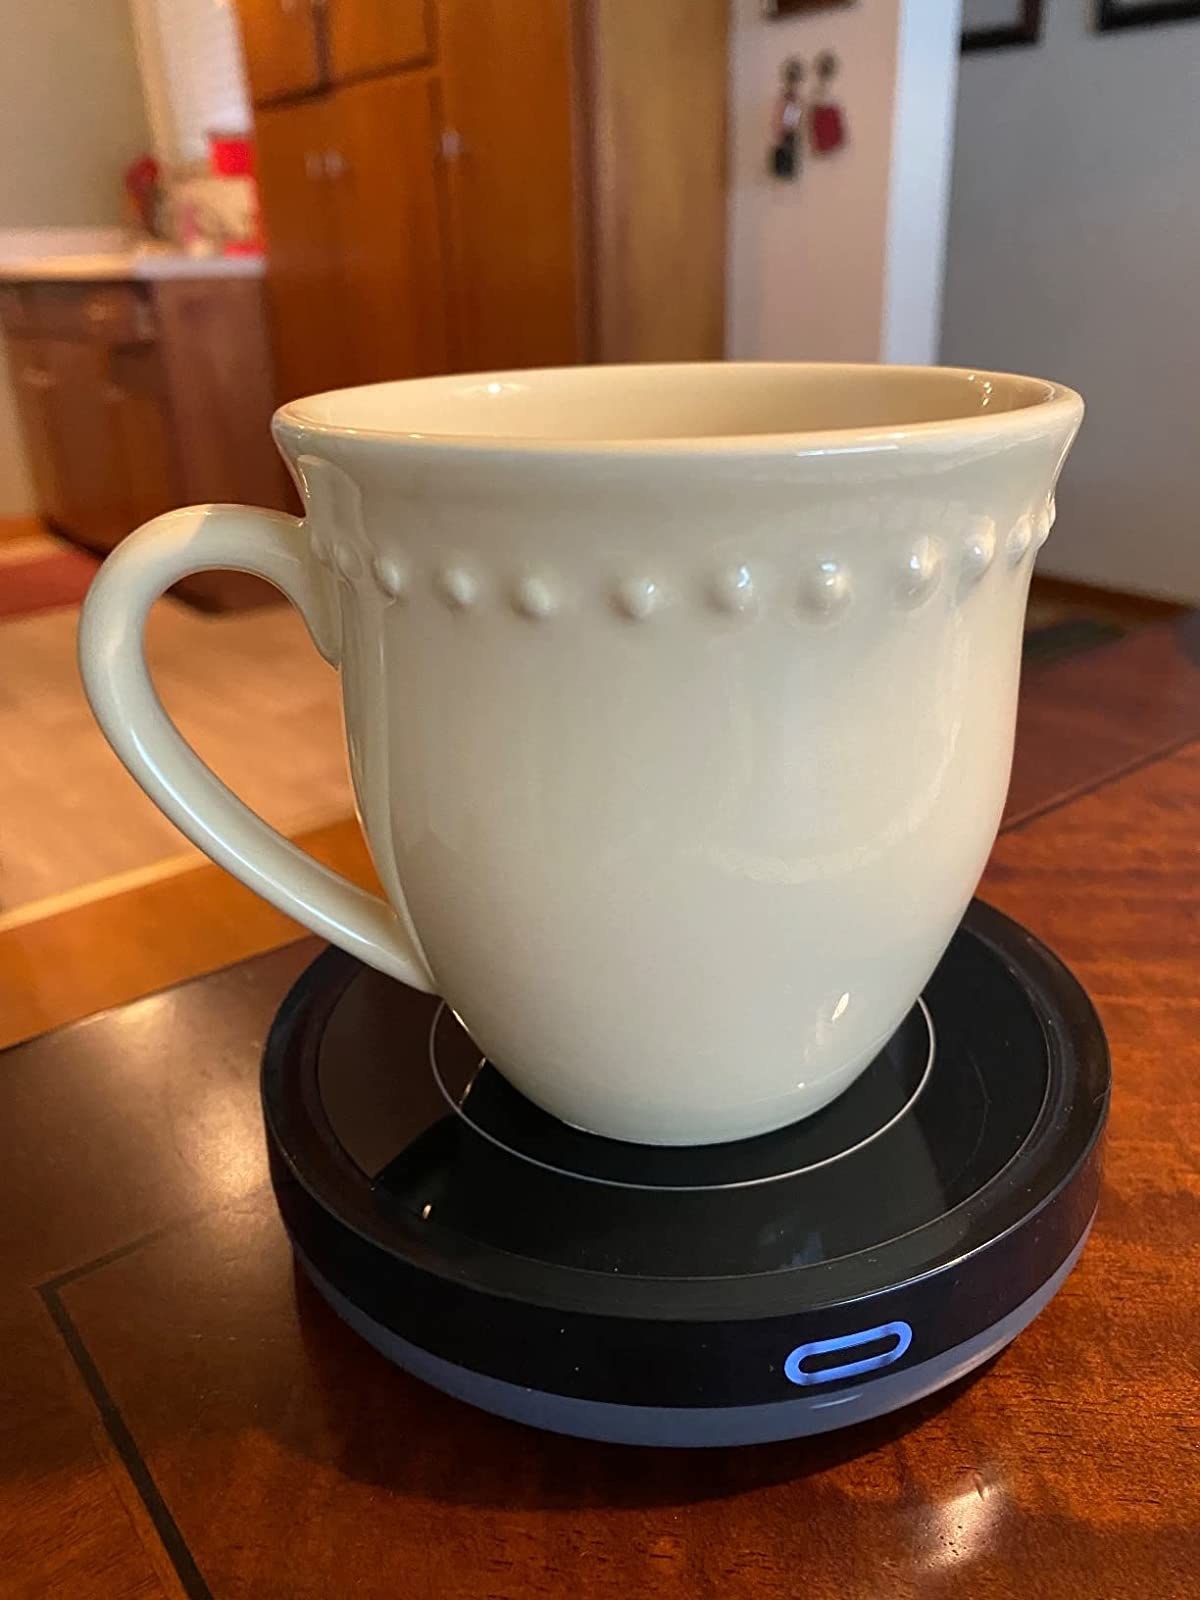 Reviewer image of a mug on the electric warmer